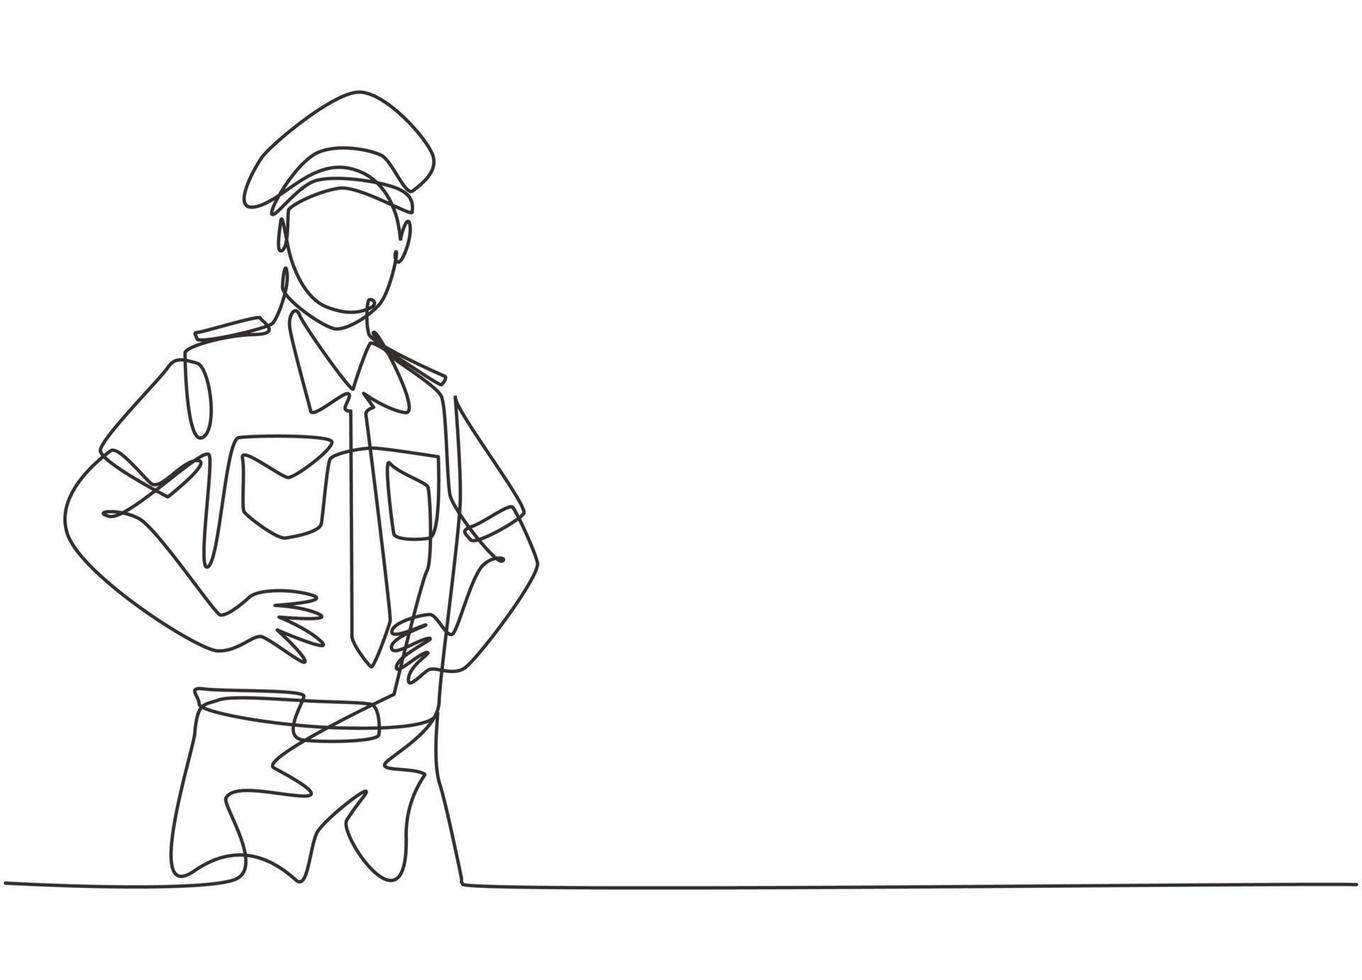 Continuous one line drawing of young captain pilot pose wearing uniform before take off flight. Professional job profession minimalist concept. Single line draw design vector graphic illustration